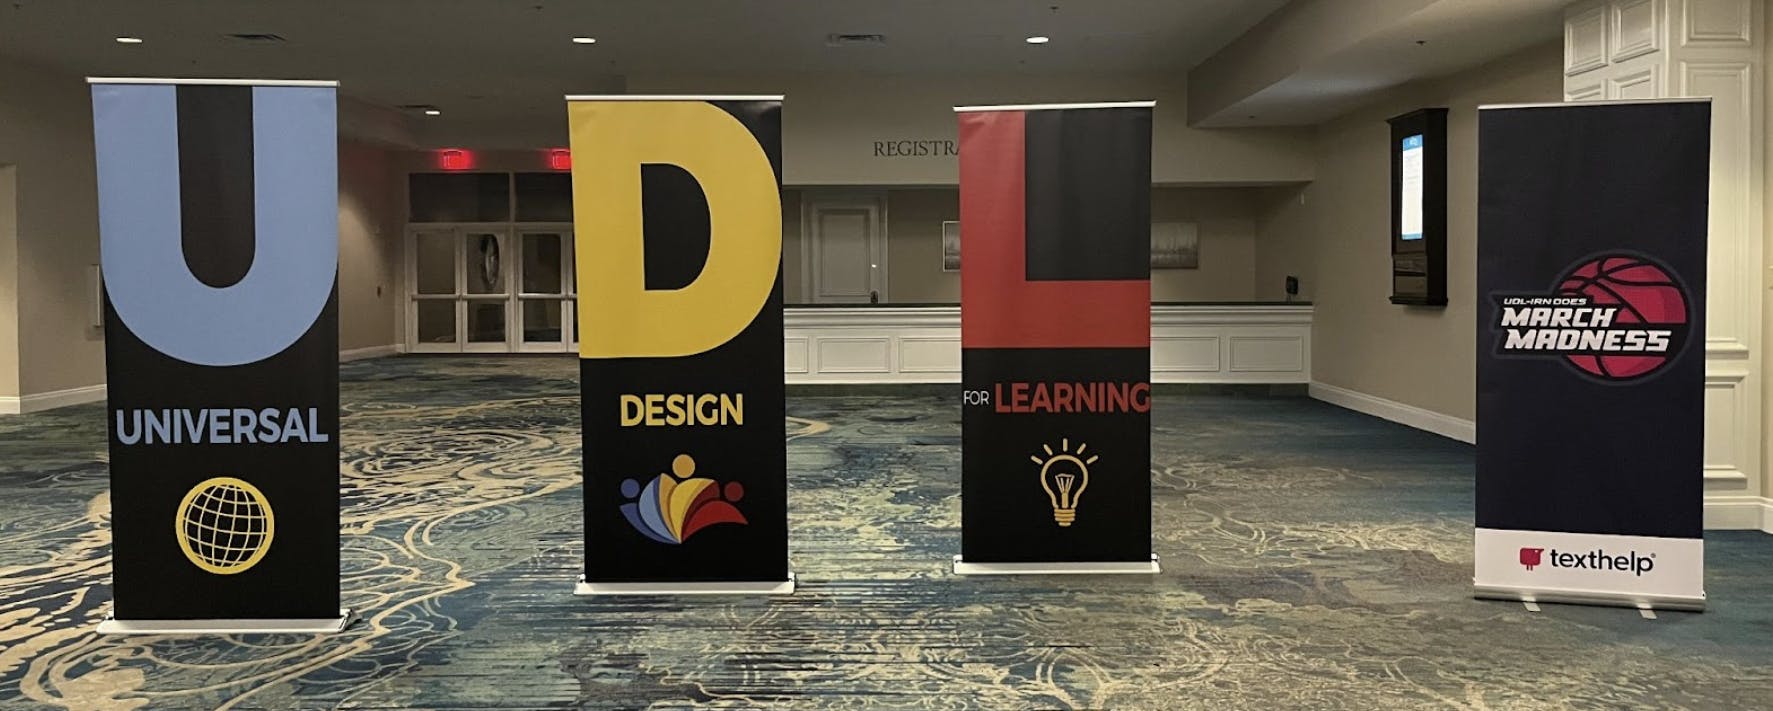 UDL-IRN March madness banners